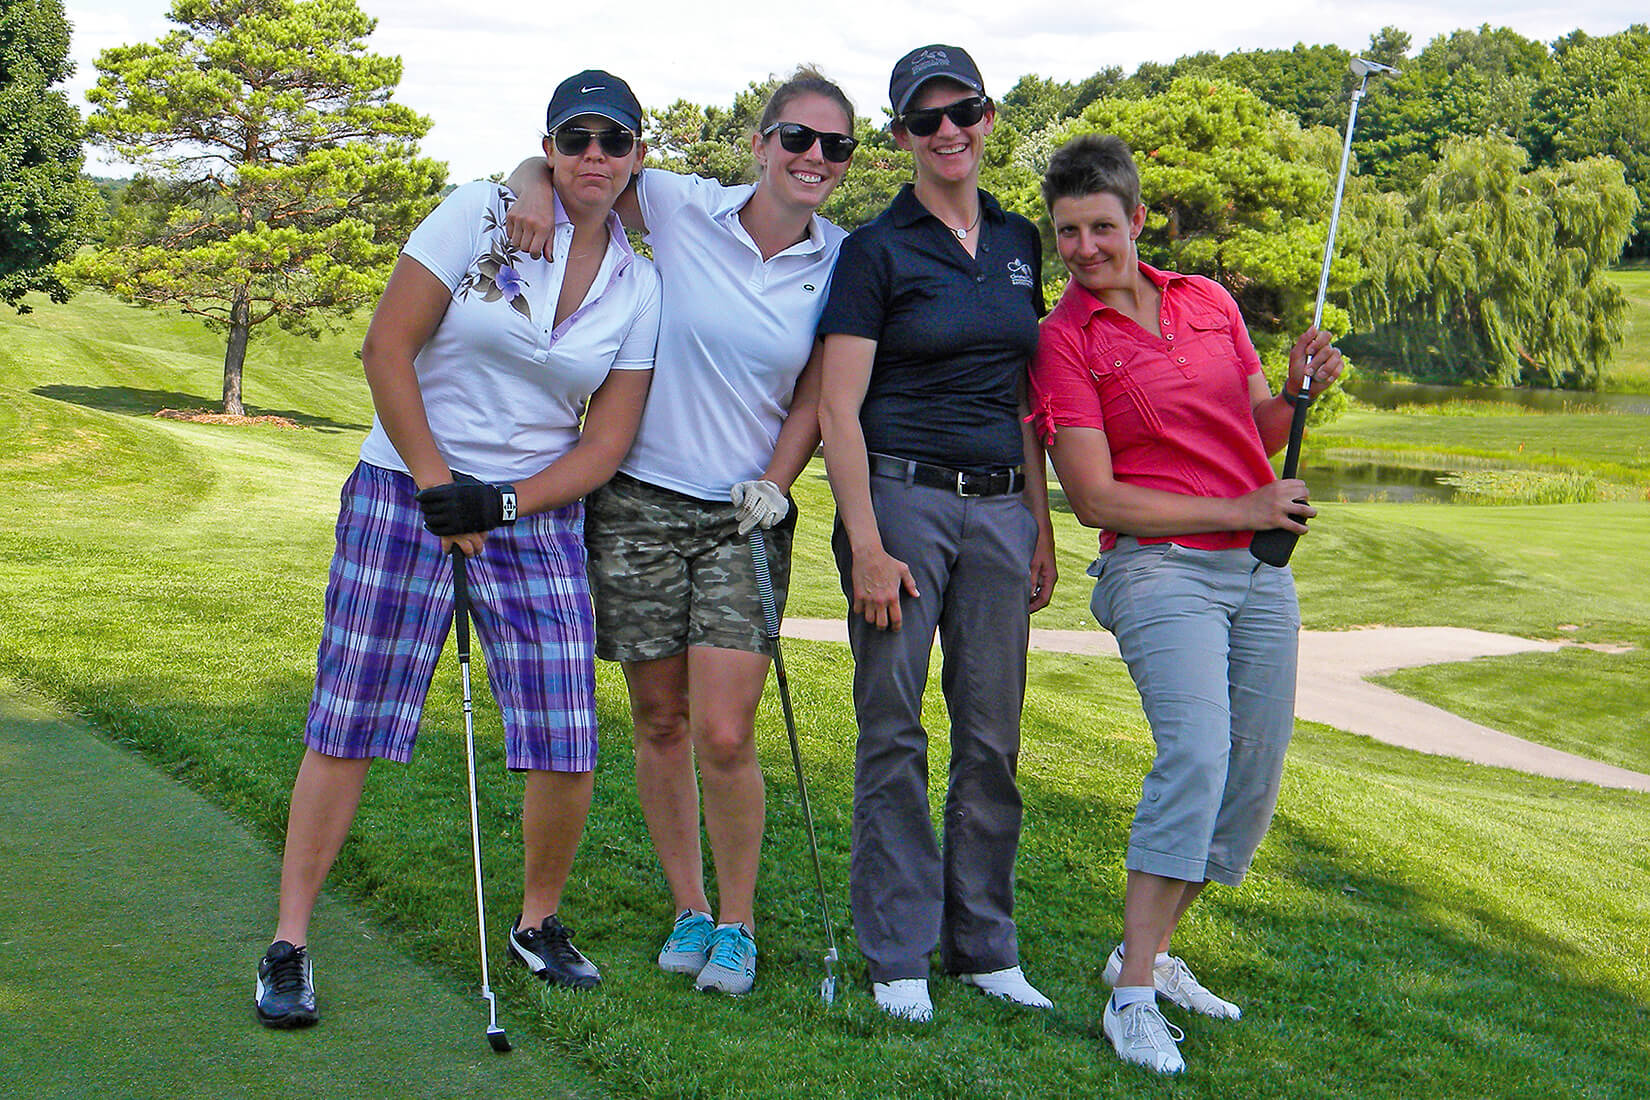 four women golfers posing on the golf course